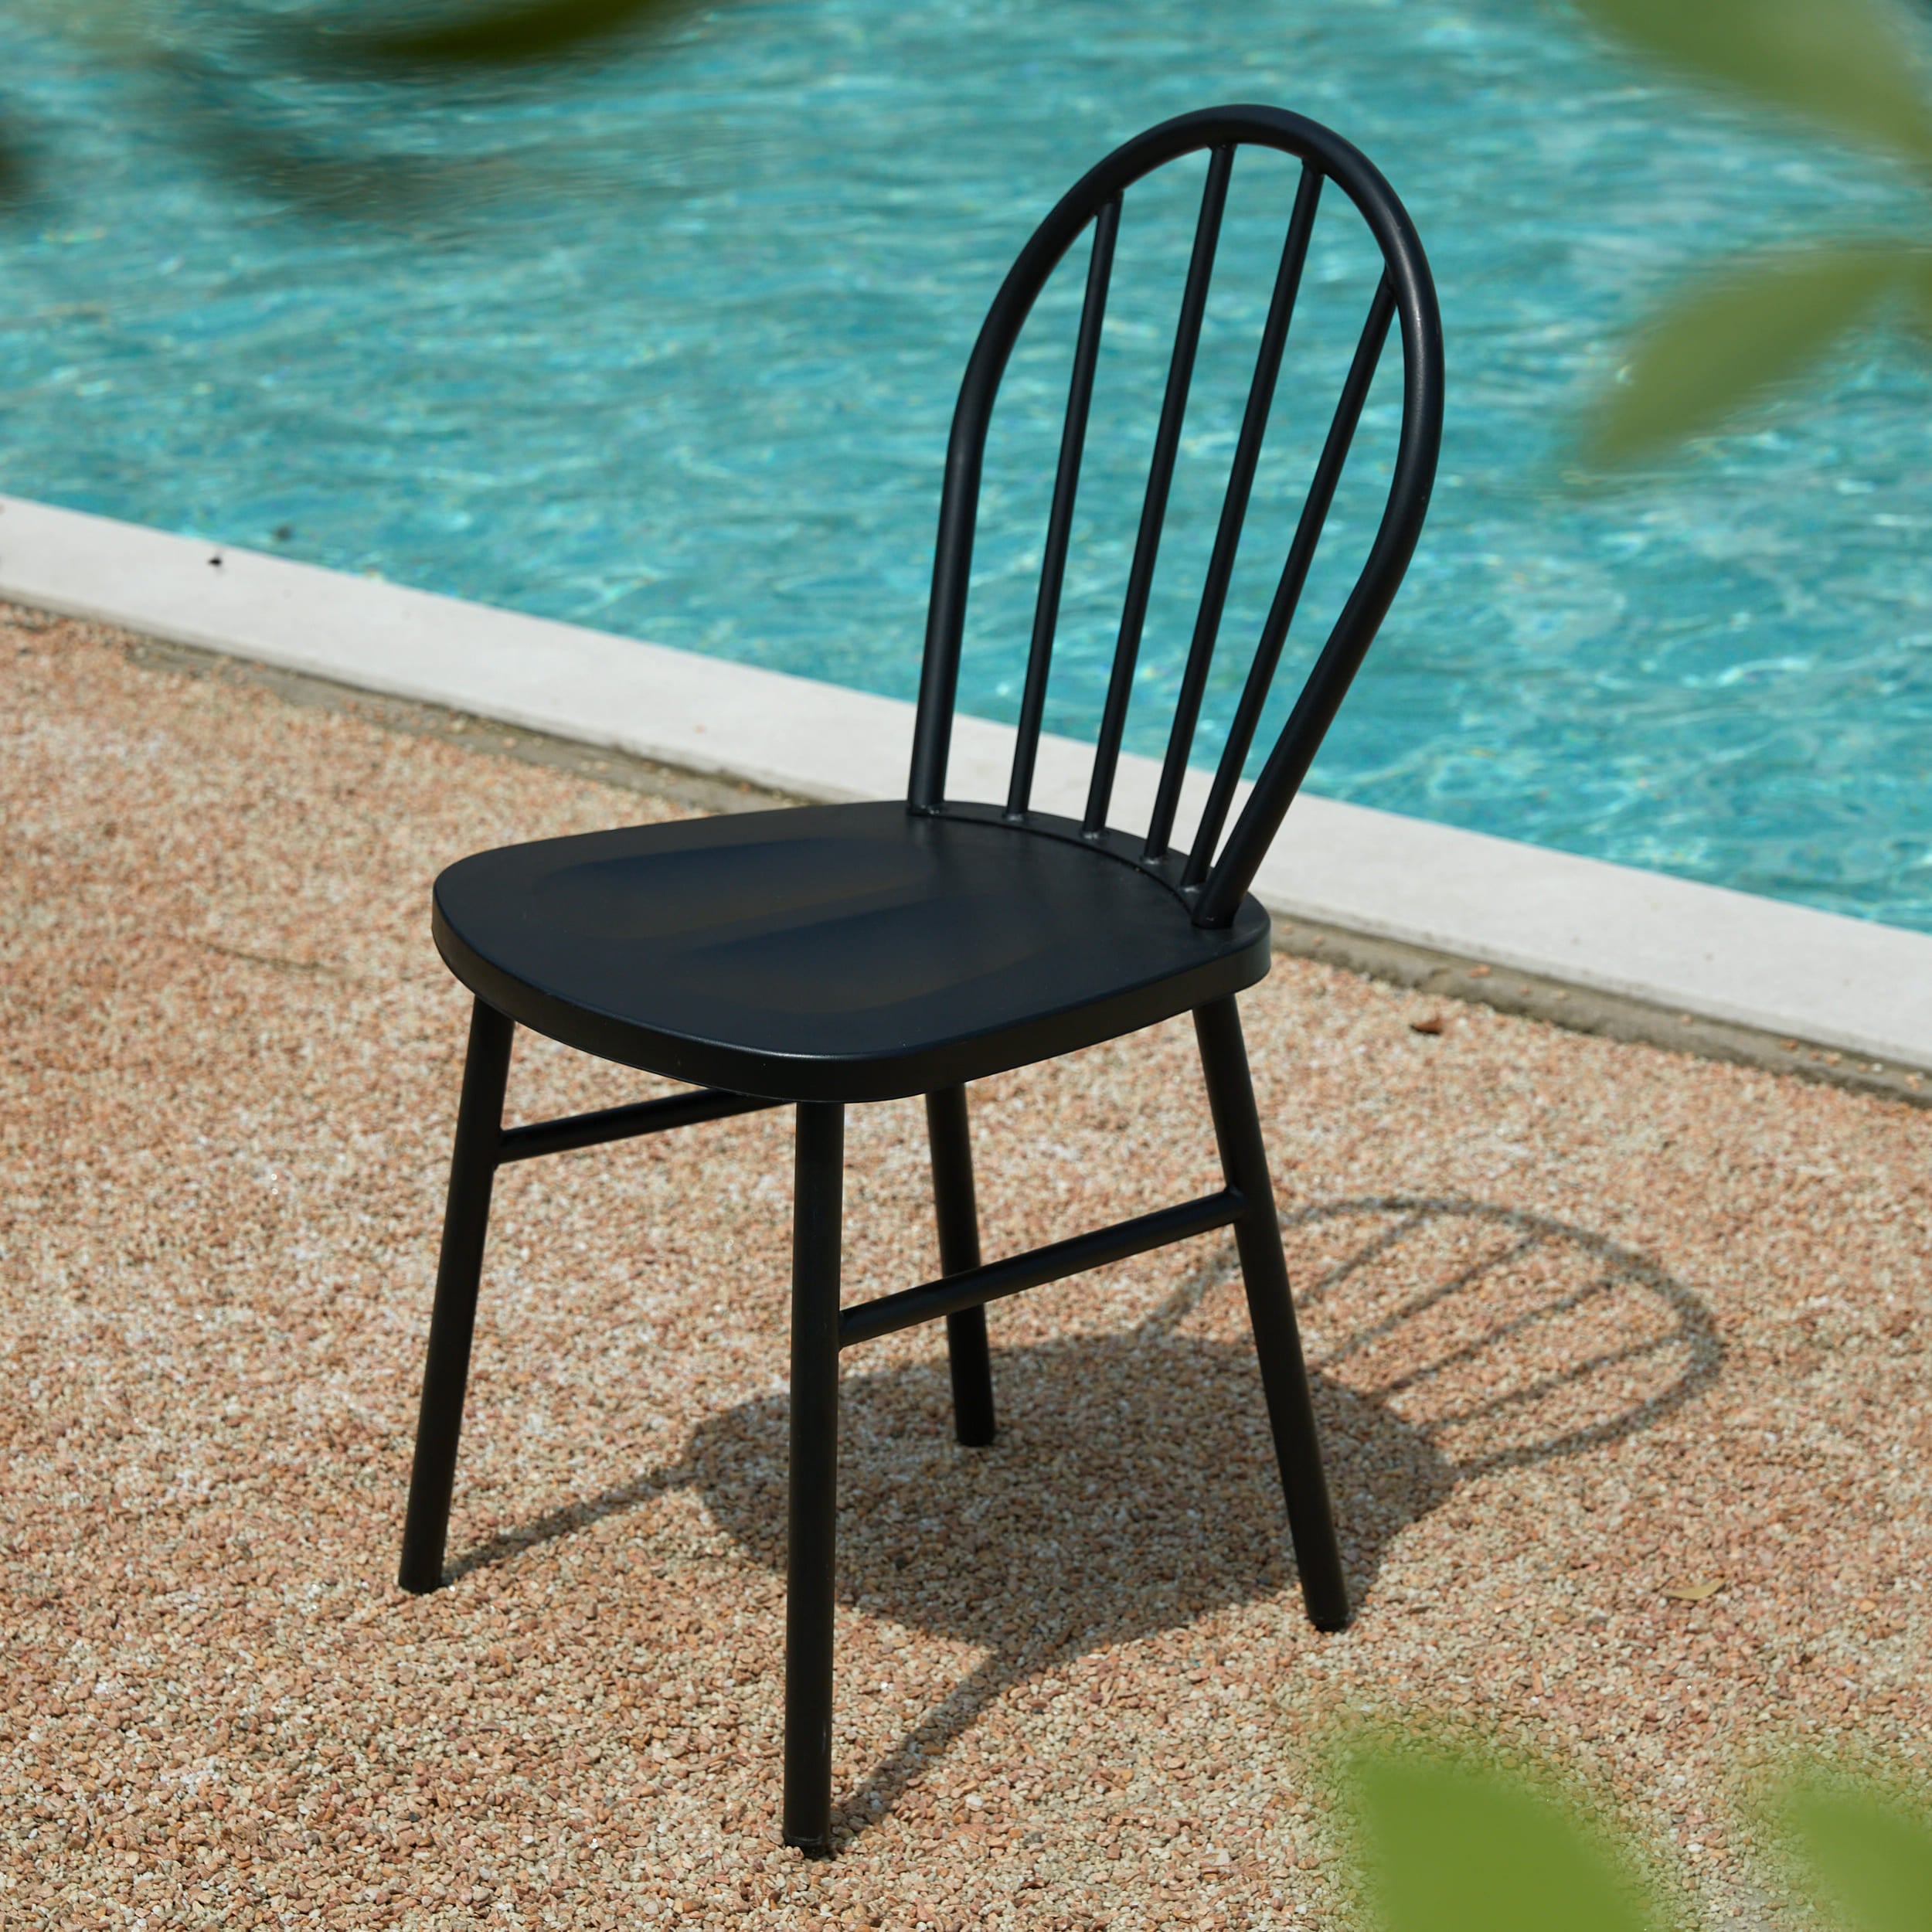 outdoor black dining chair, set of 2 4 6